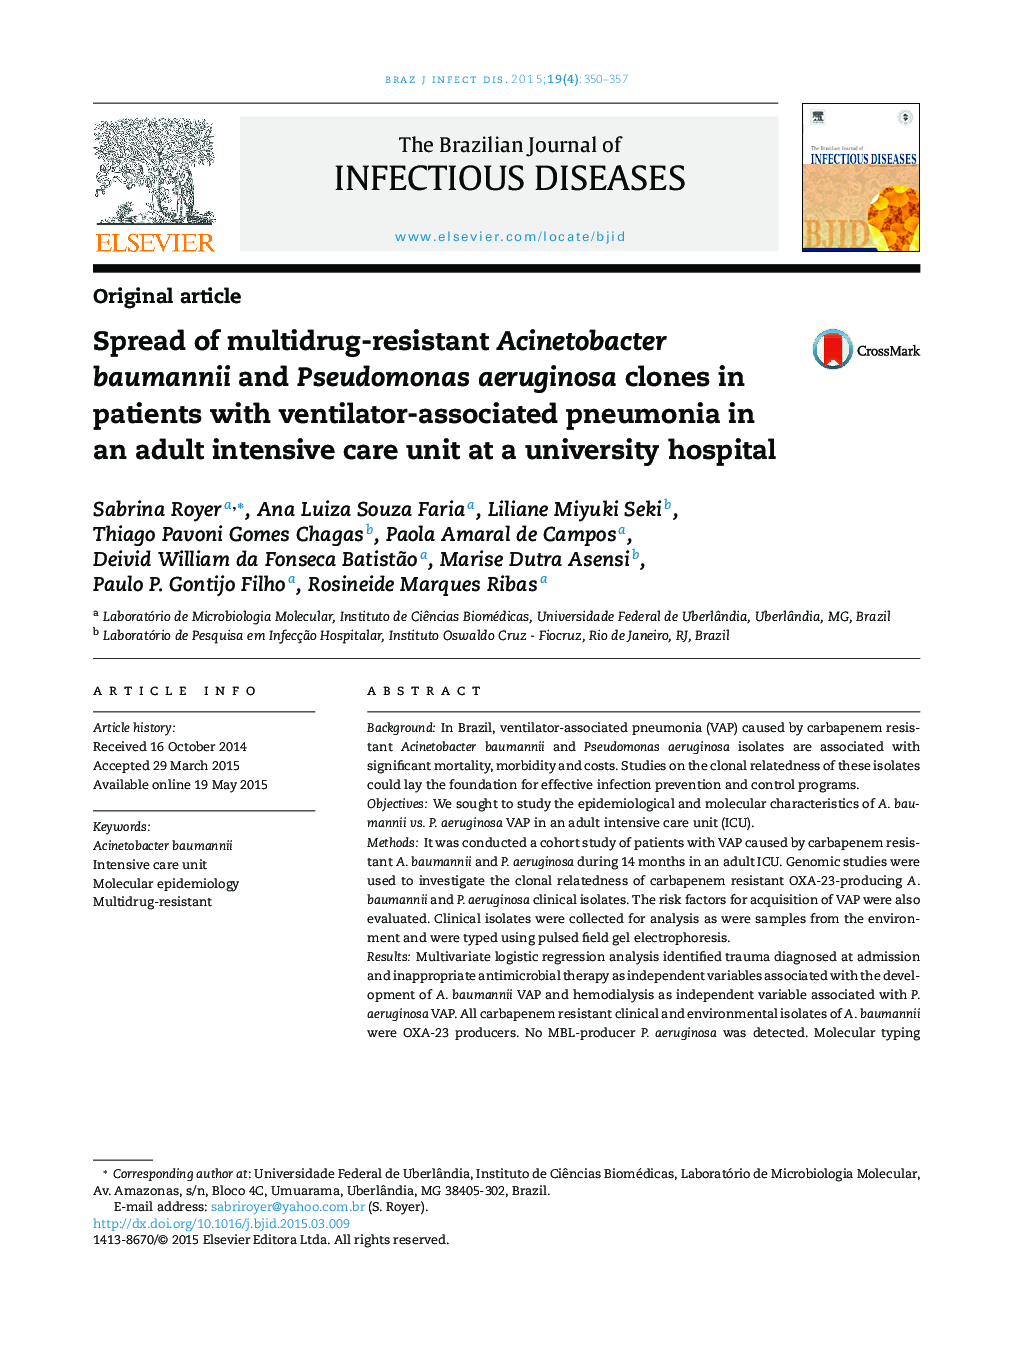 Spread of multidrug-resistant Acinetobacter baumannii and Pseudomonas aeruginosa clones in patients with ventilator-associated pneumonia in an adult intensive care unit at a university hospital